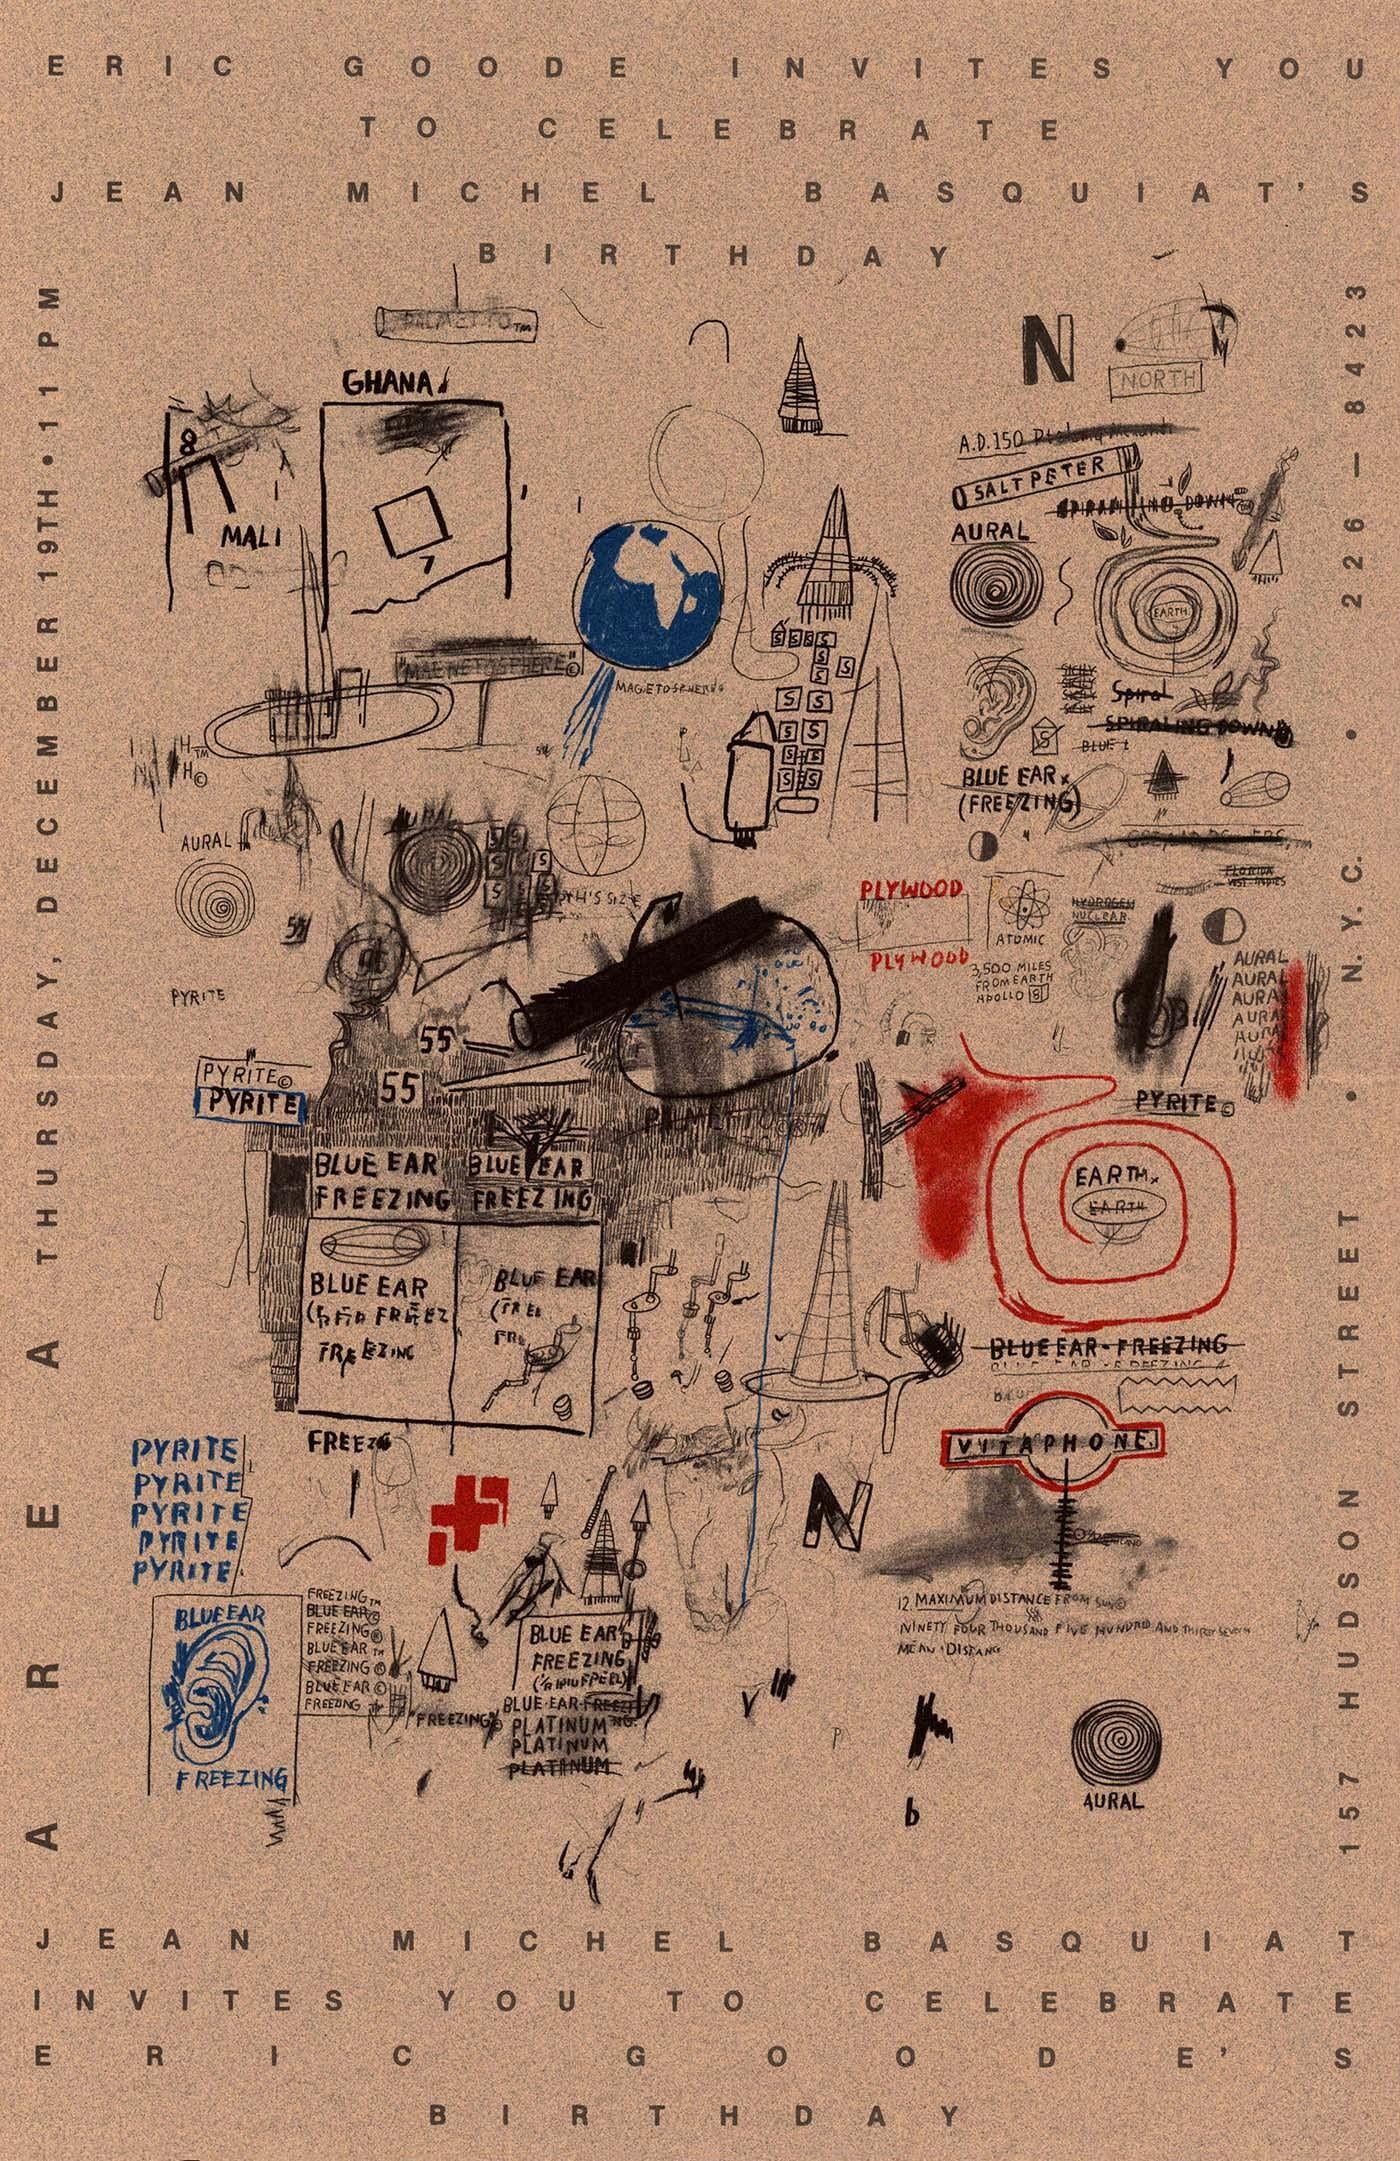 Jean-Michel Basquiat Area 1985:
Basquiat illustrated this incredibly rare printed invitation on the occasion of his December 19th, 1985 birthday at the much historic, 1980s NY nightclub, Area. A VIP invite celebrating Basquiat's birthday alongside